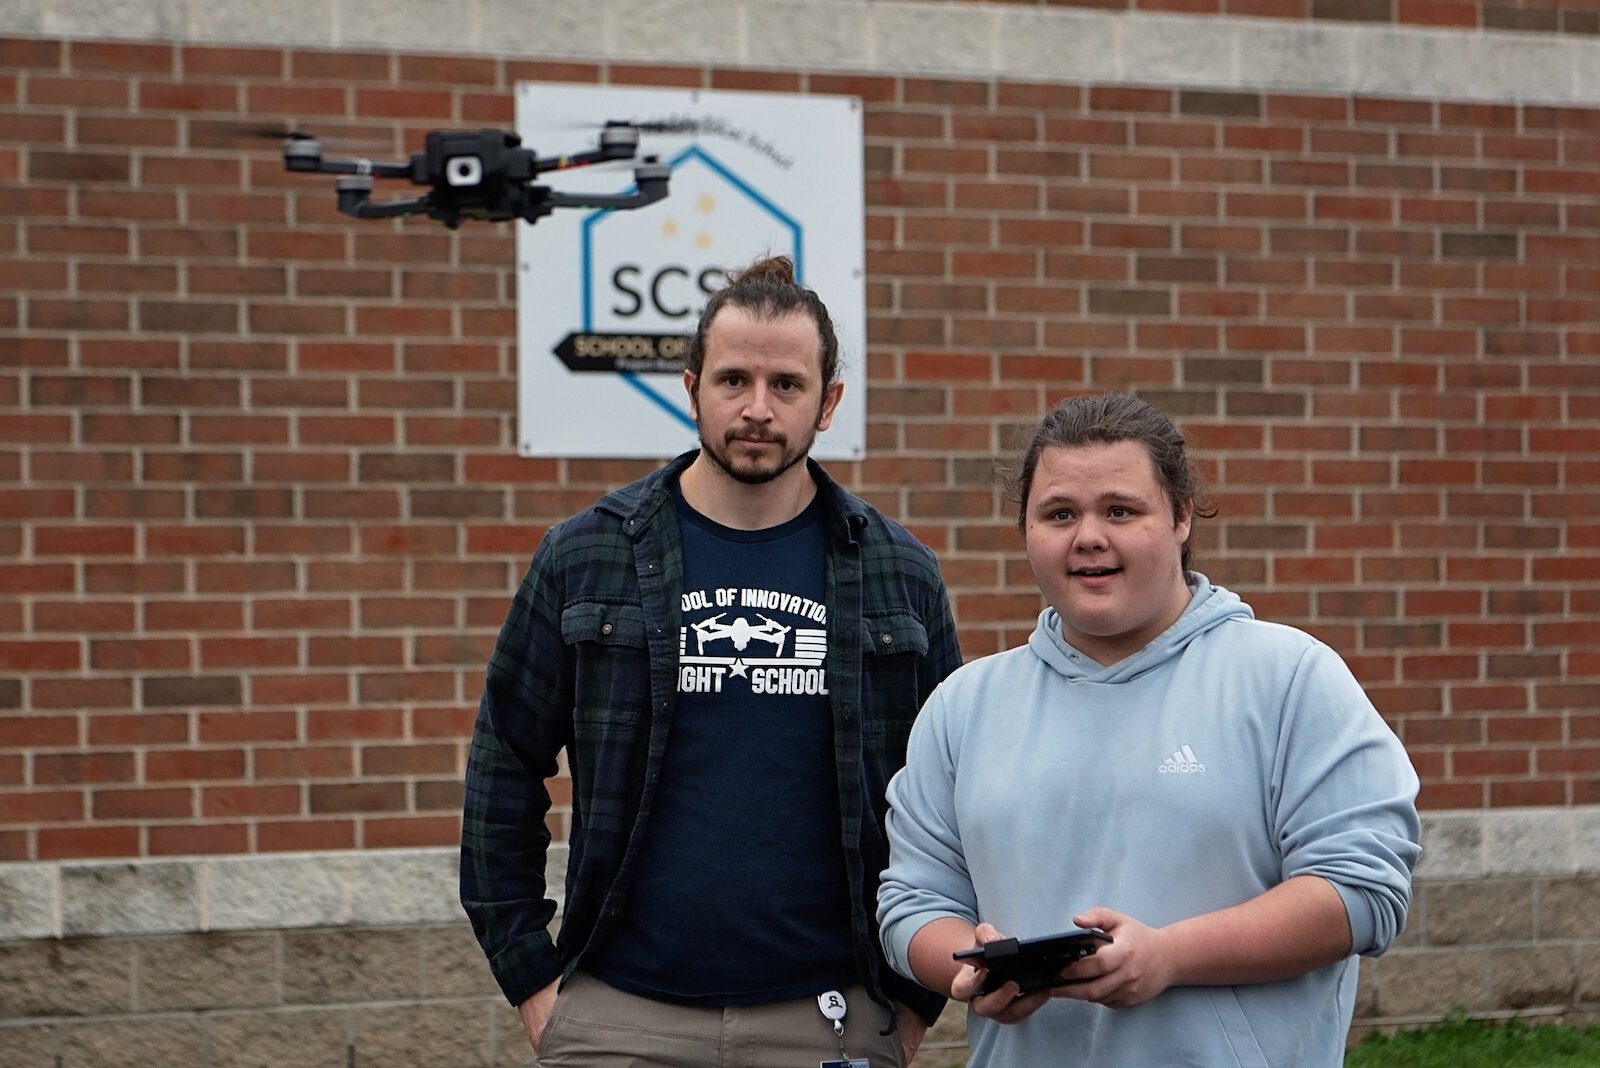 Leland Davis, a student at Springfield's School of Innovation, demonstrates his handling of a drone under the watch of his instructor,  Matt Perrine.